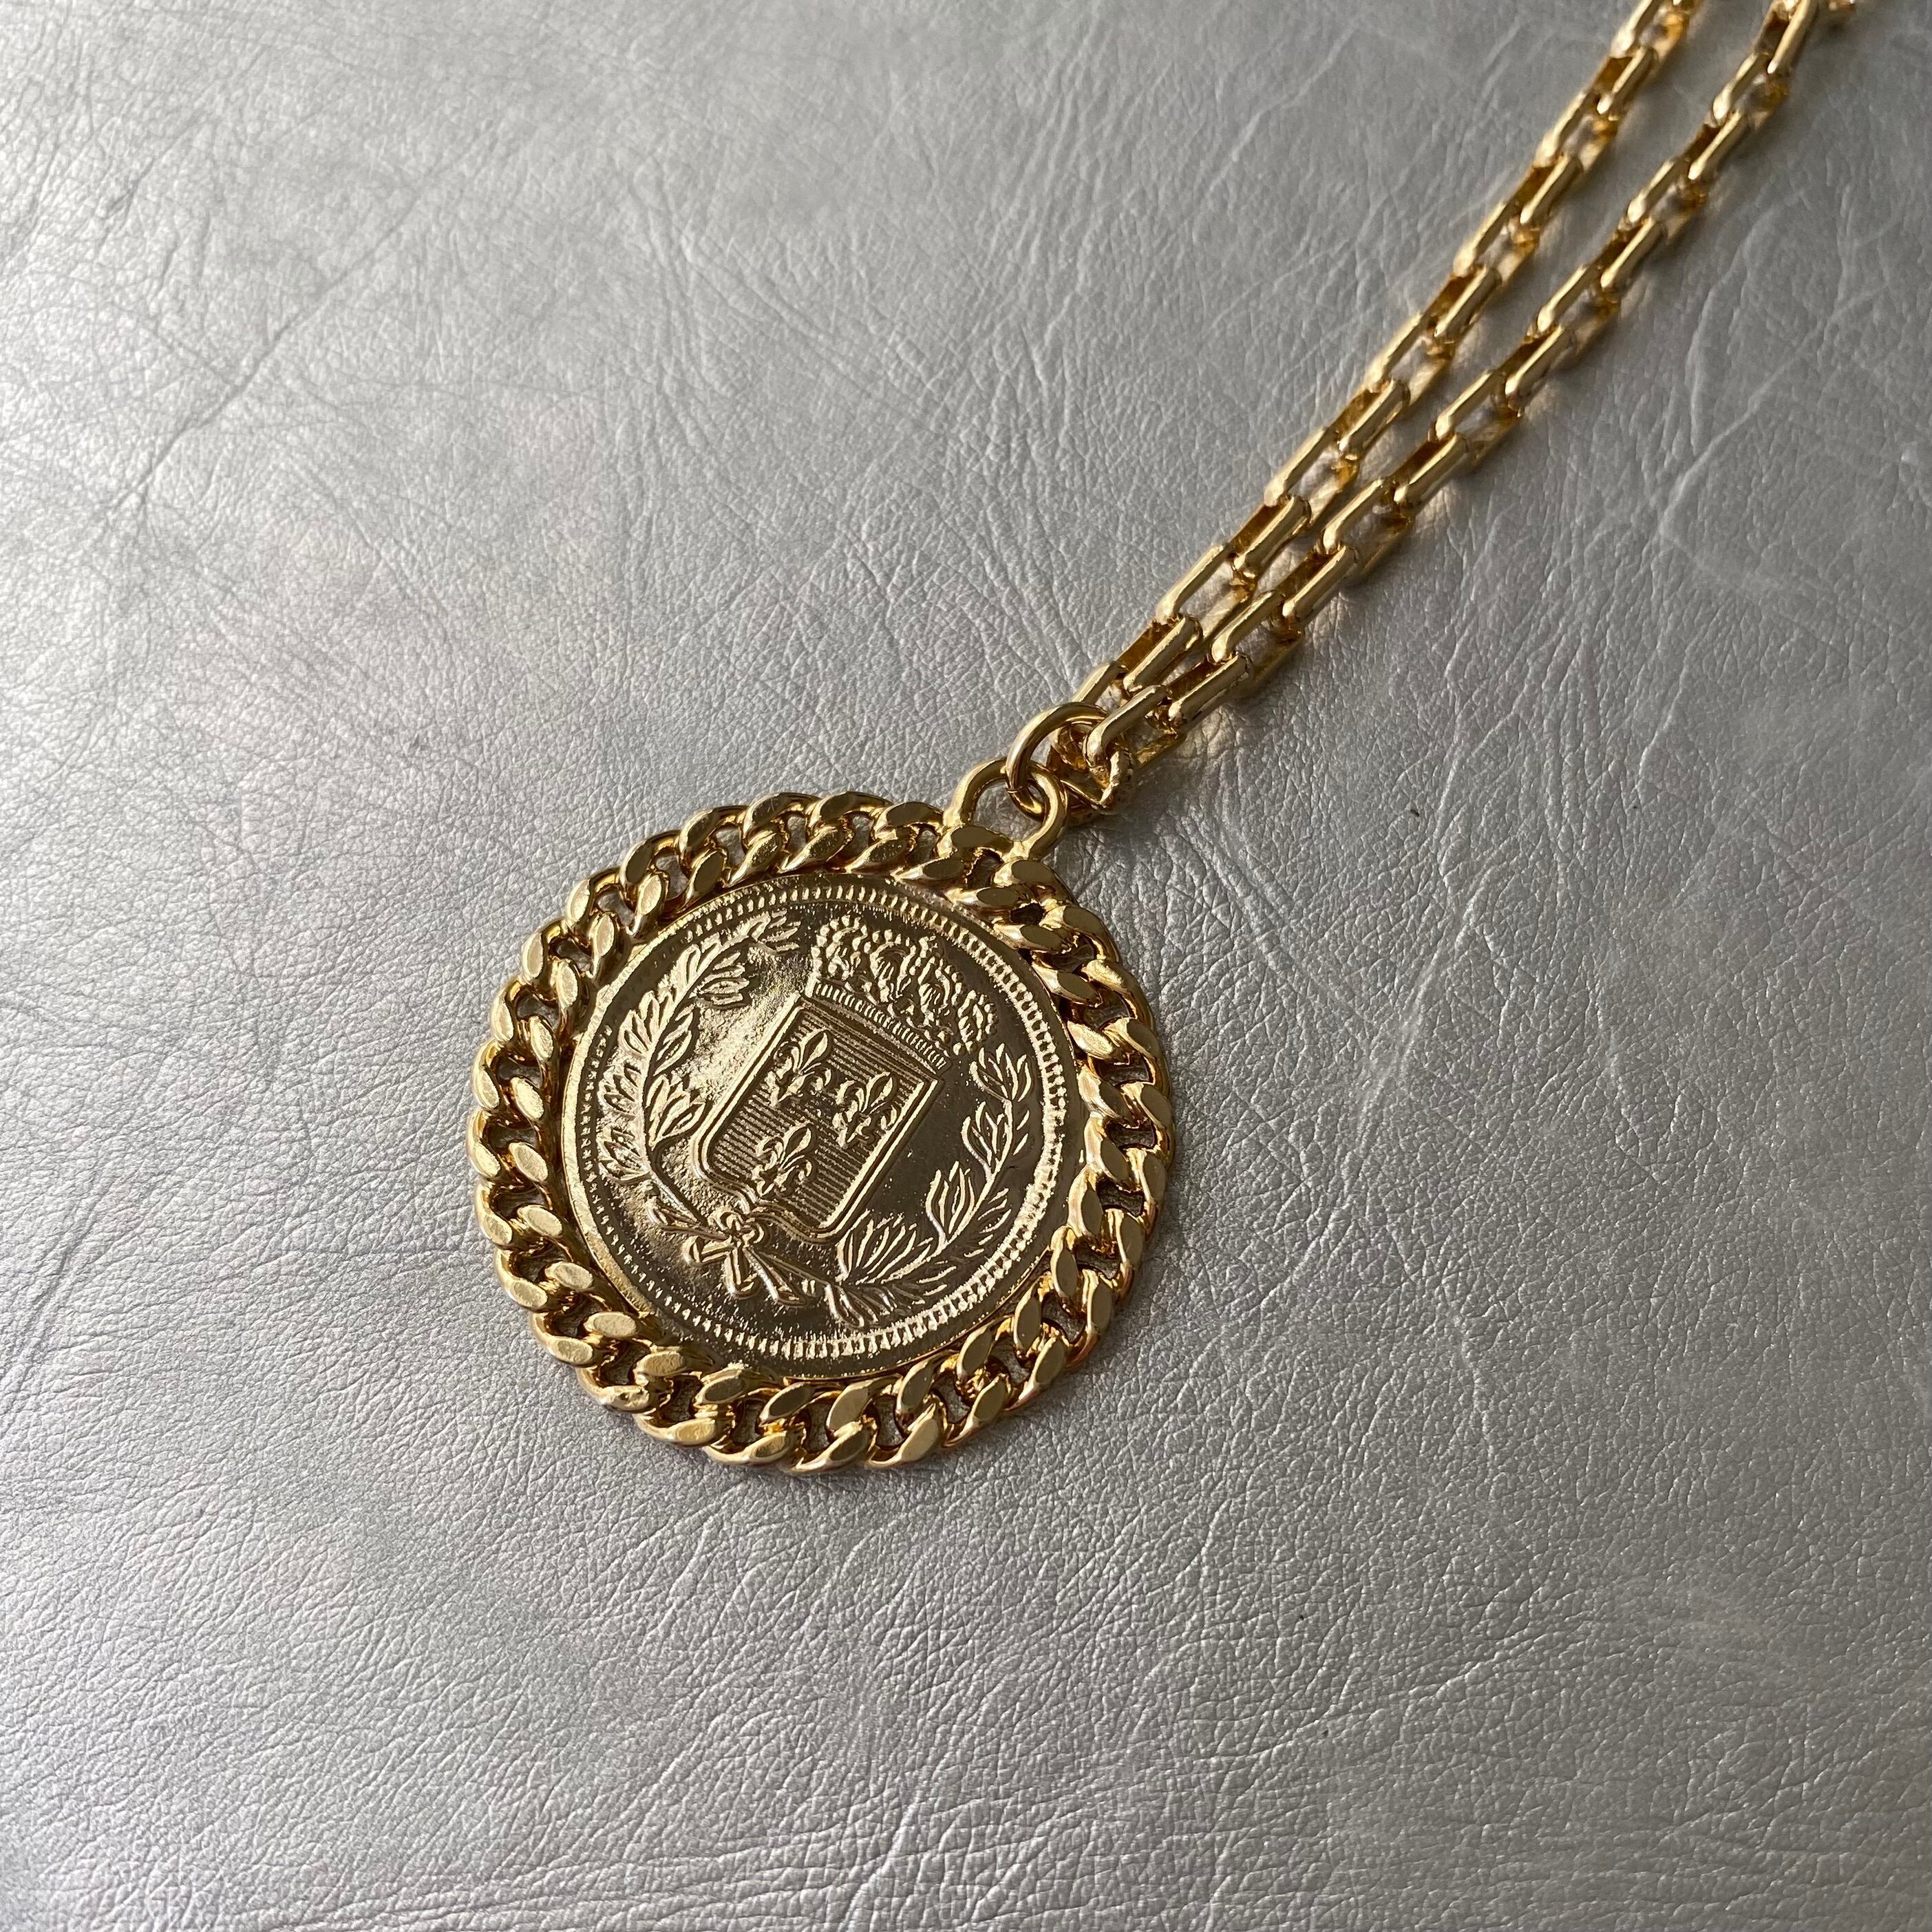 Used retro gold coin necklace レトロ ユーズド ゴールド コイン